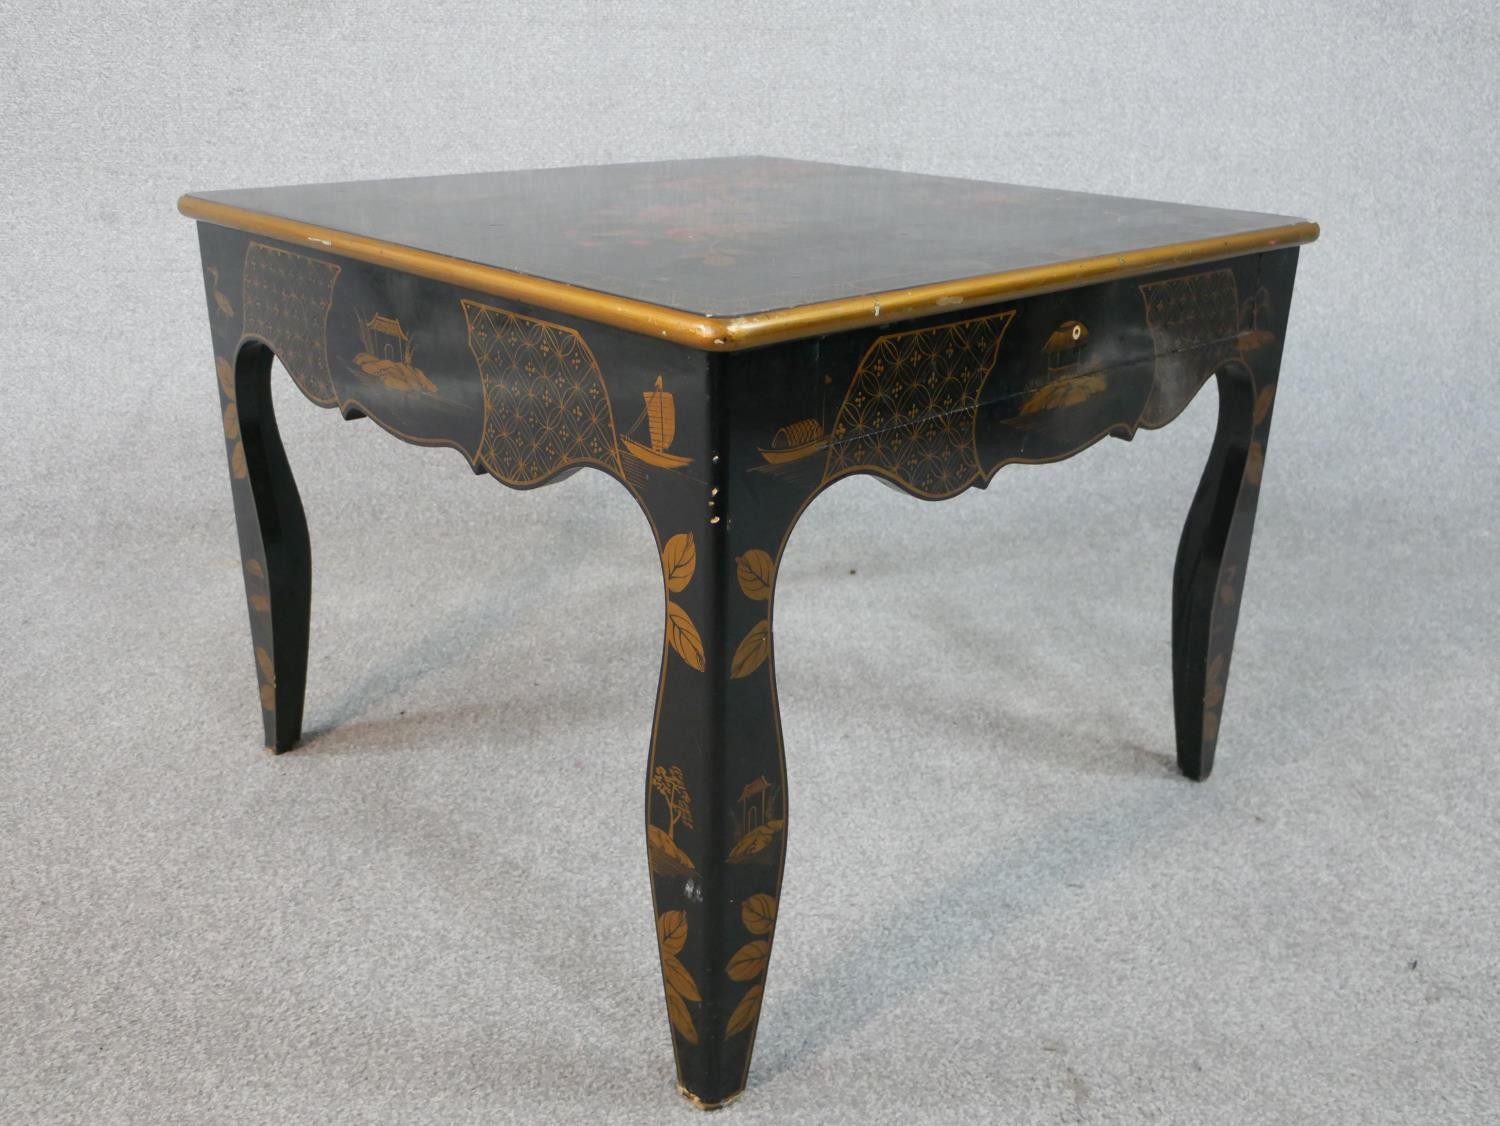 A black lacquered Chinese low table with hand gilded bird and blossom decoration. W.66 H.52 D.66cm - Image 3 of 6